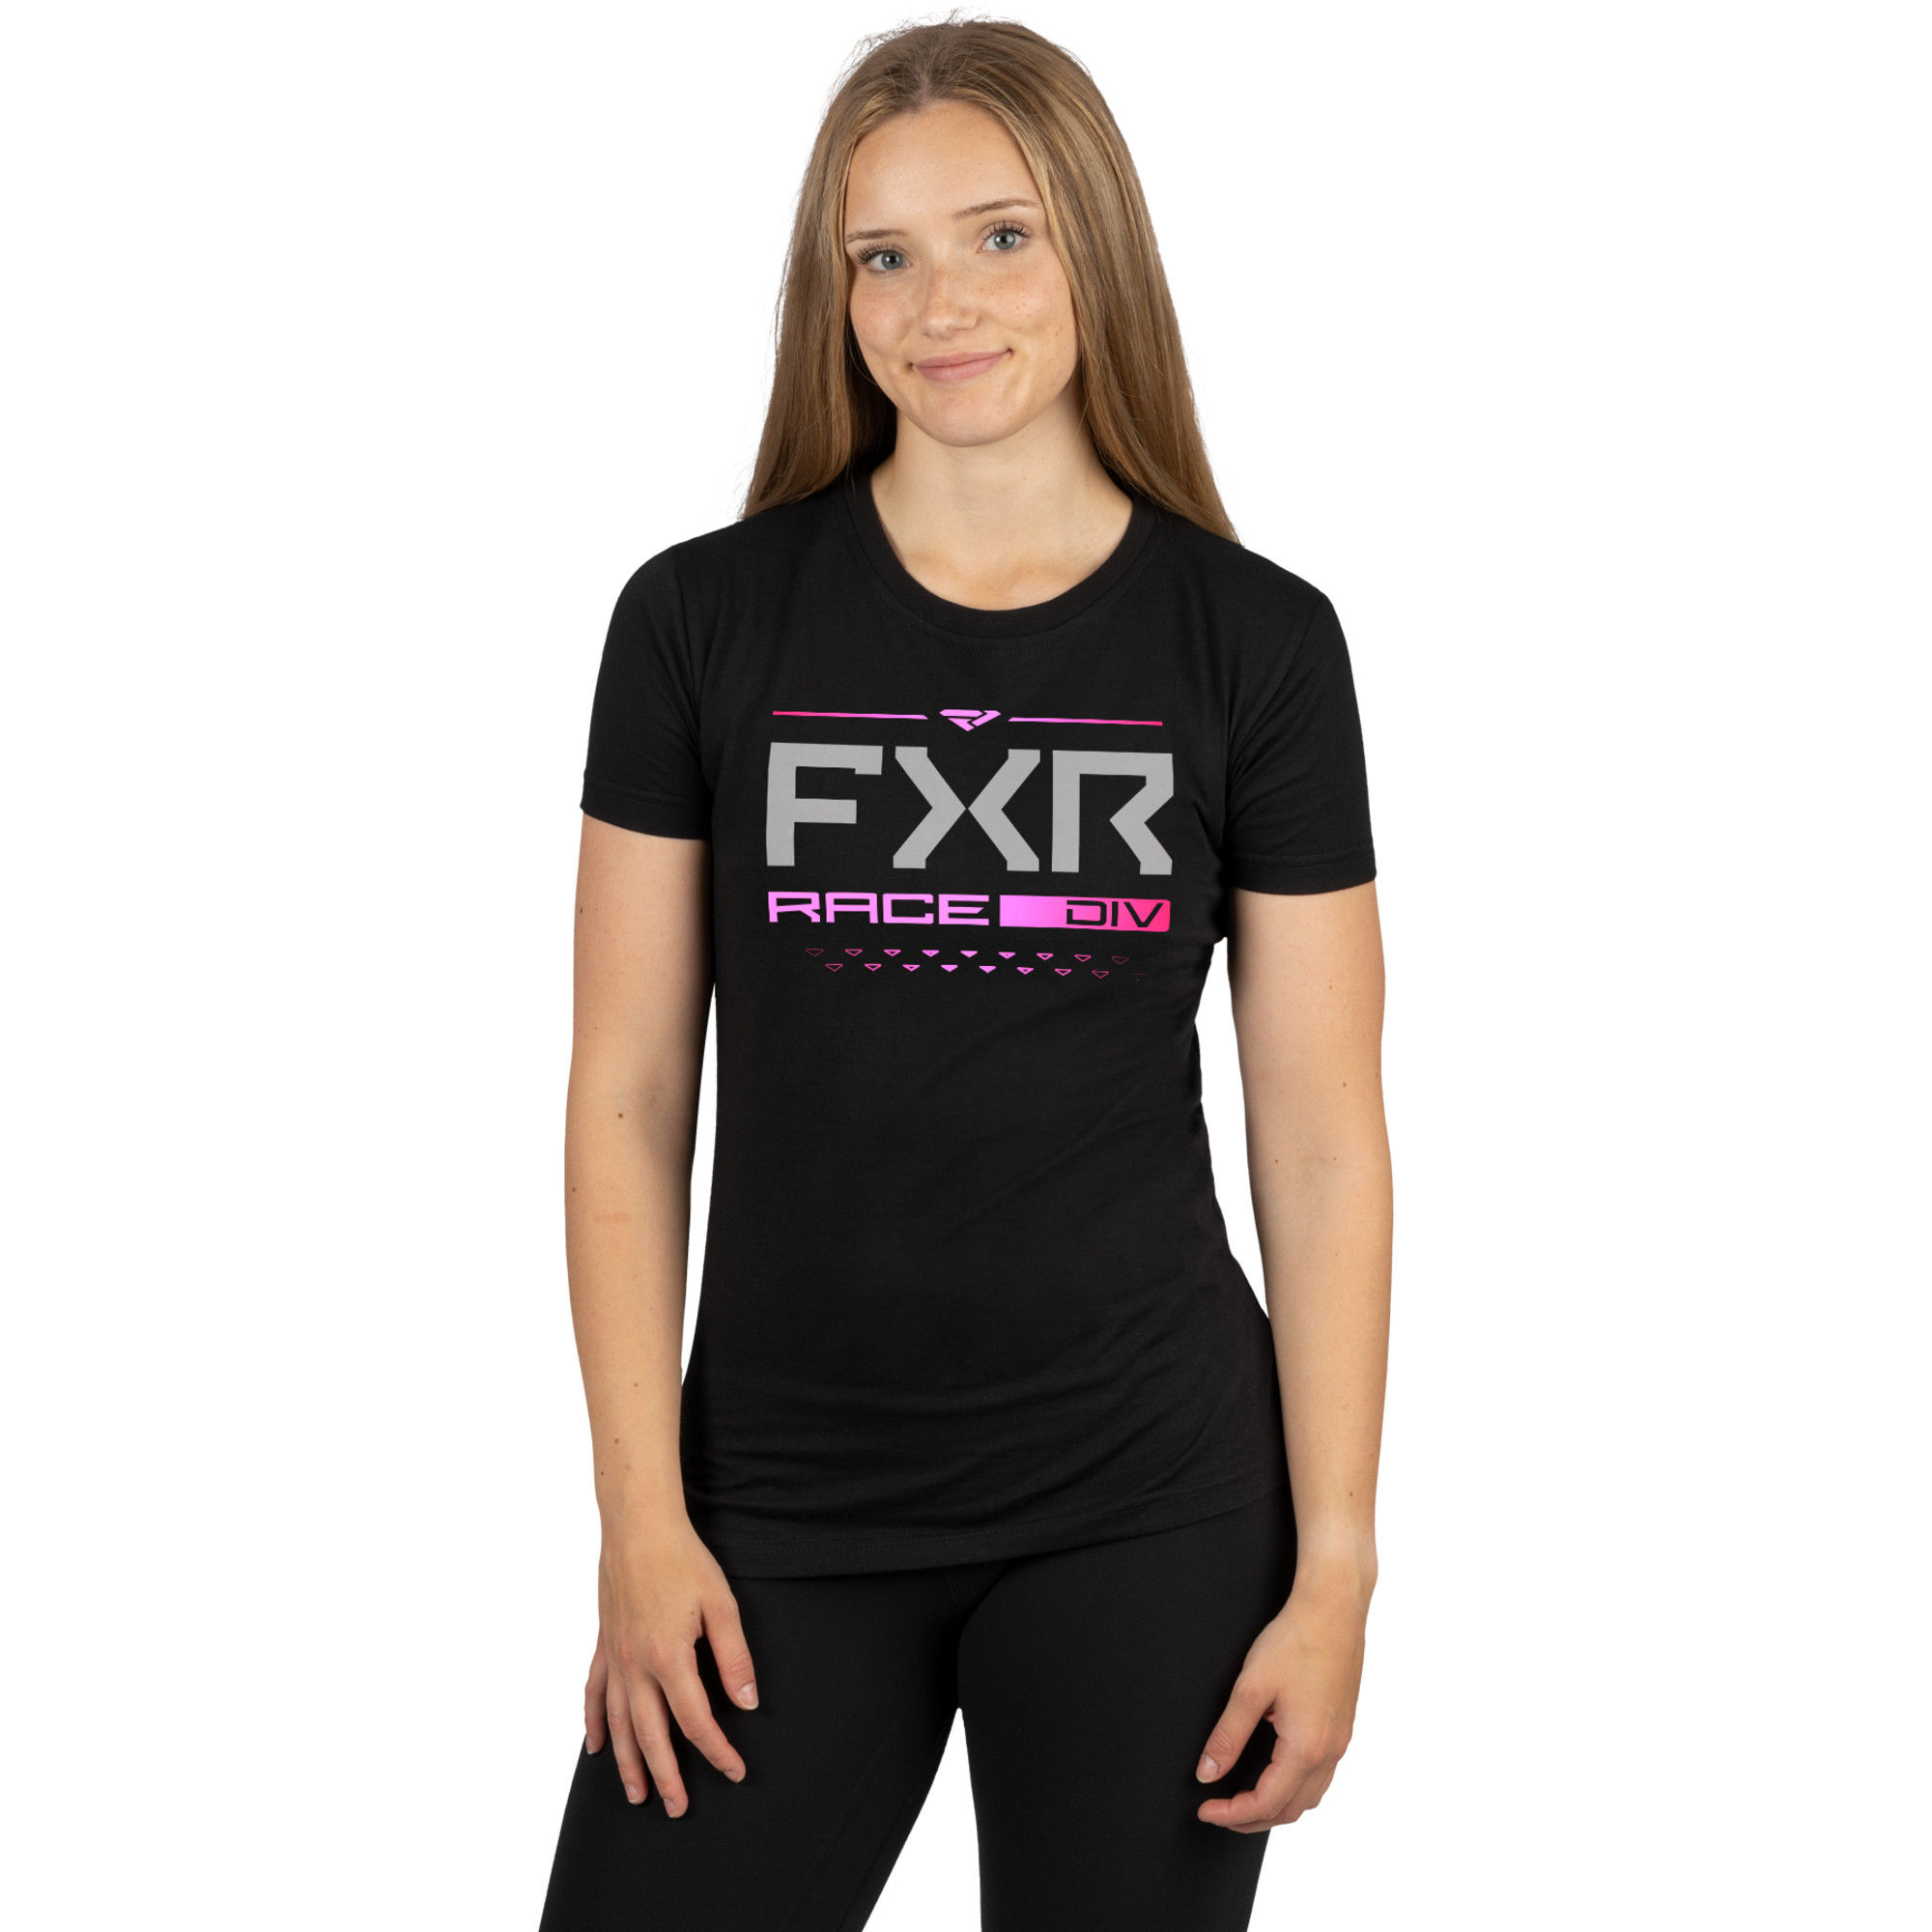 fxr racing t-shirt shirts for womens race division premium